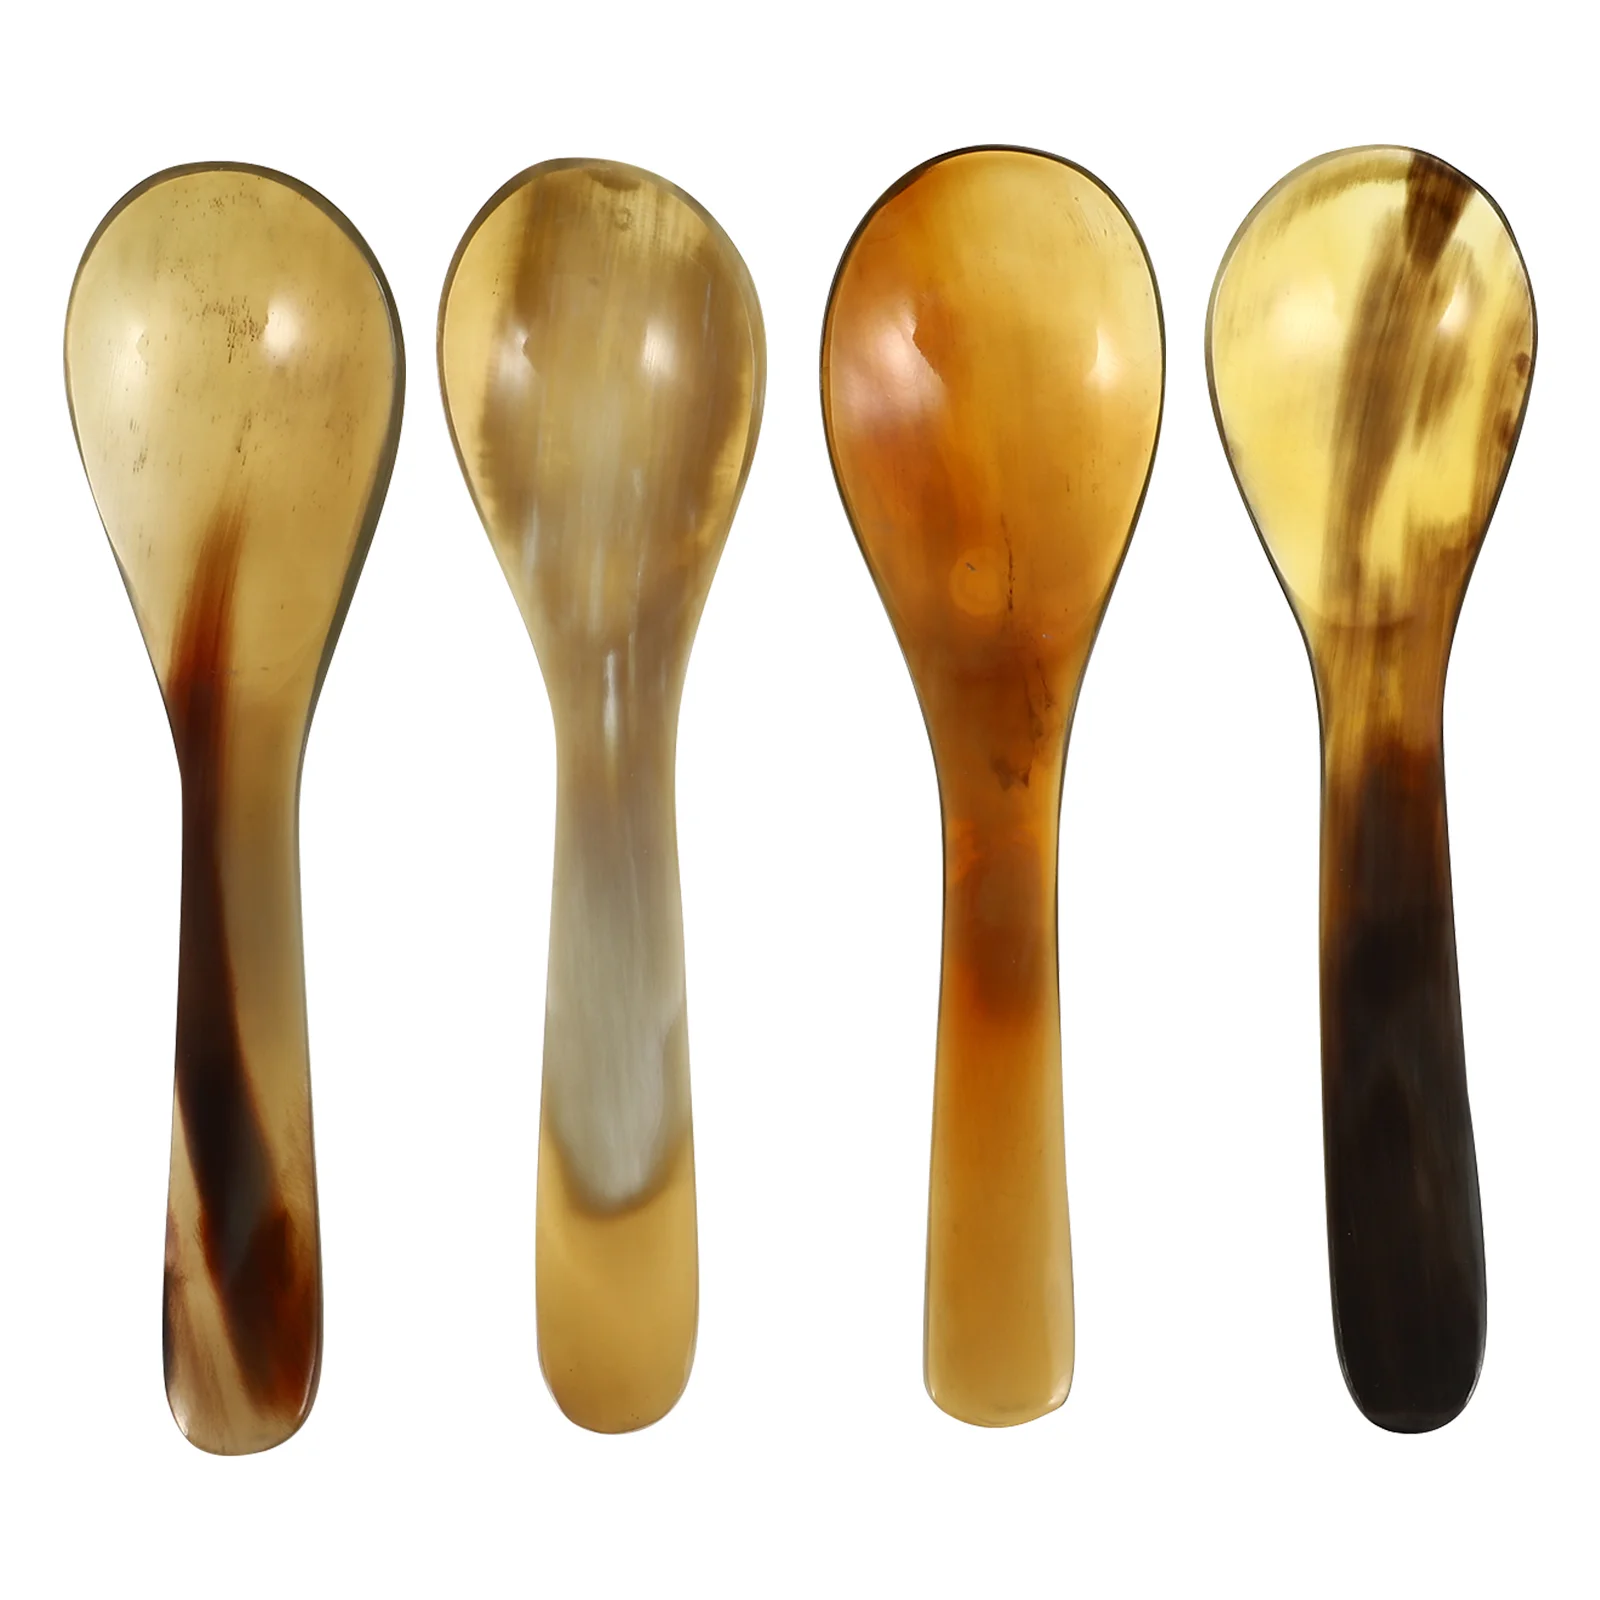 

Dessert Spoon Ox Horn Soup Spoons Coffee Espresso Spoon Caviar Spoon Stirring Spoon Kitchen Utensils For Home Kitchen